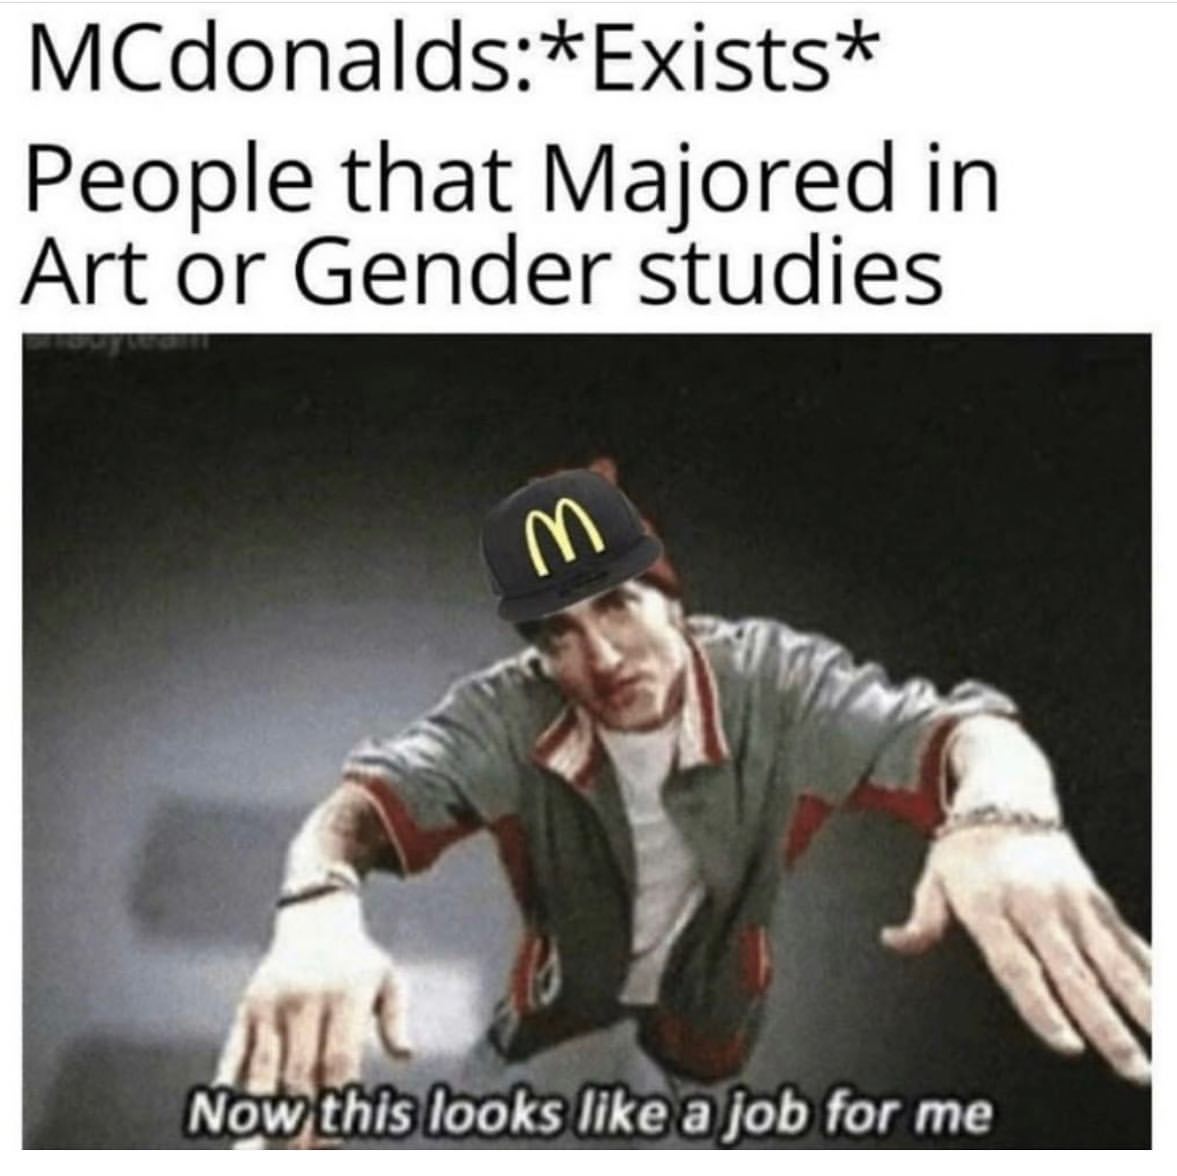 MCdonalds: *Exists*  People that majored in art or gender studies.  Now this looks like a job for me.